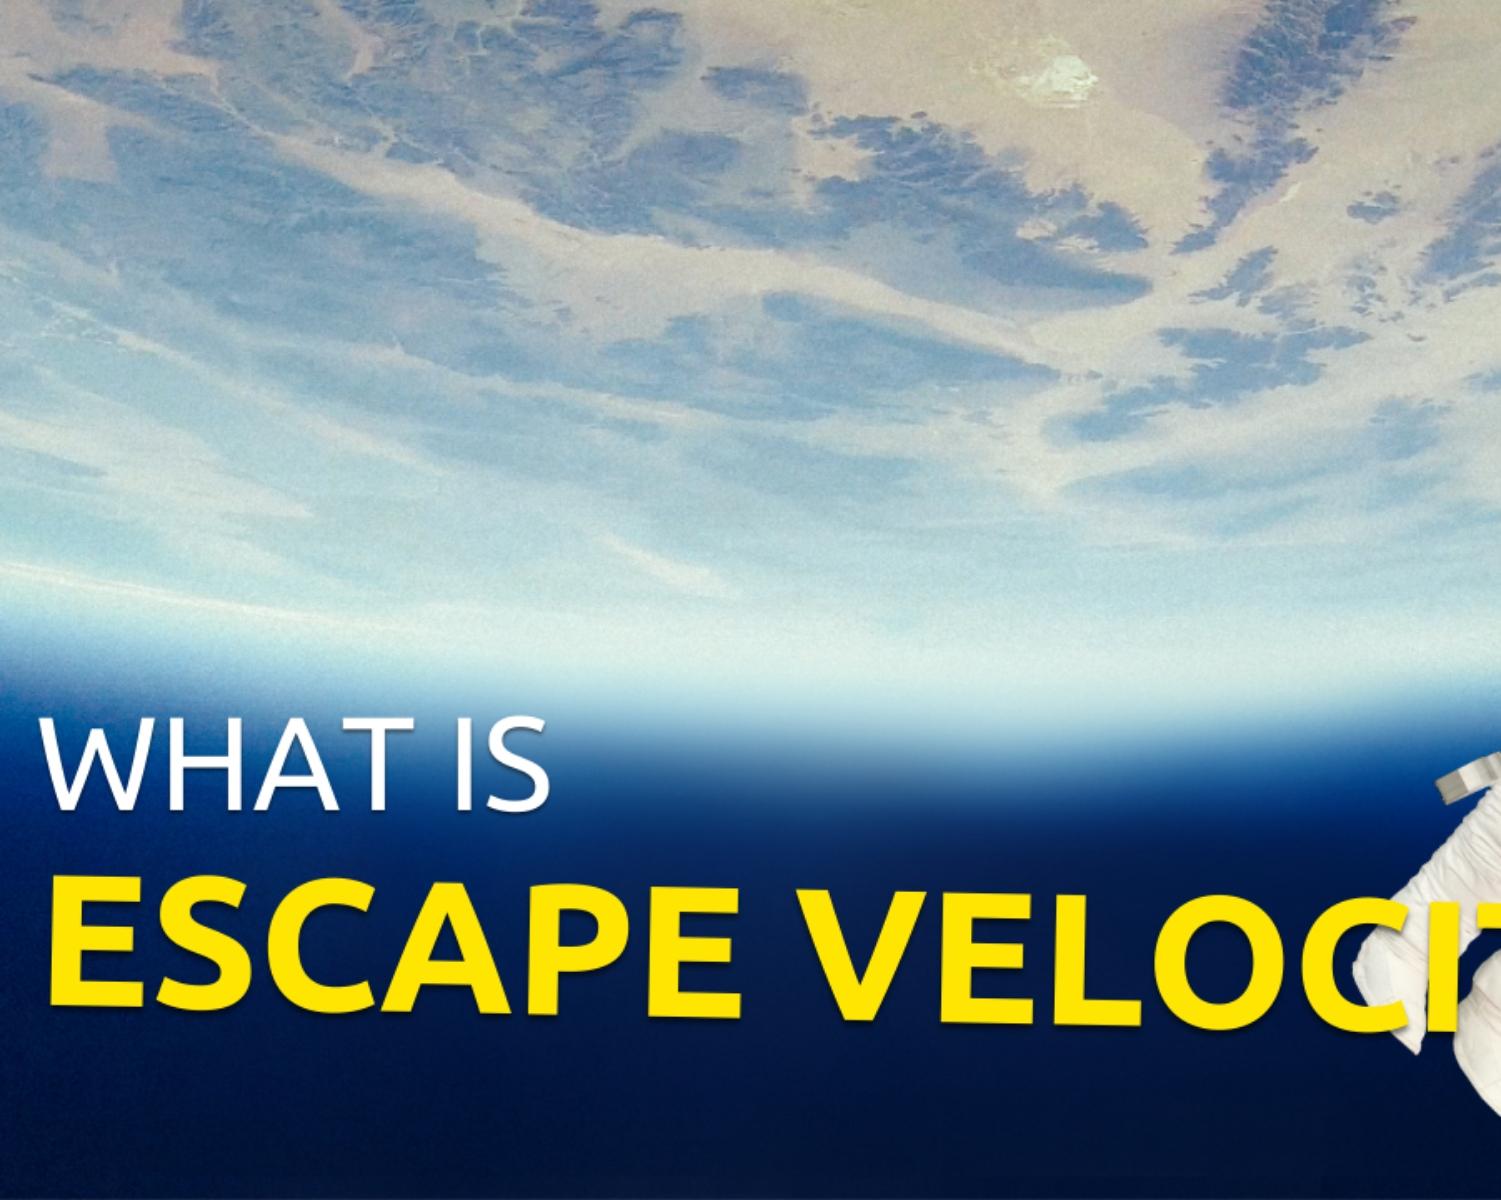 What Does Escape Velocity Mean?